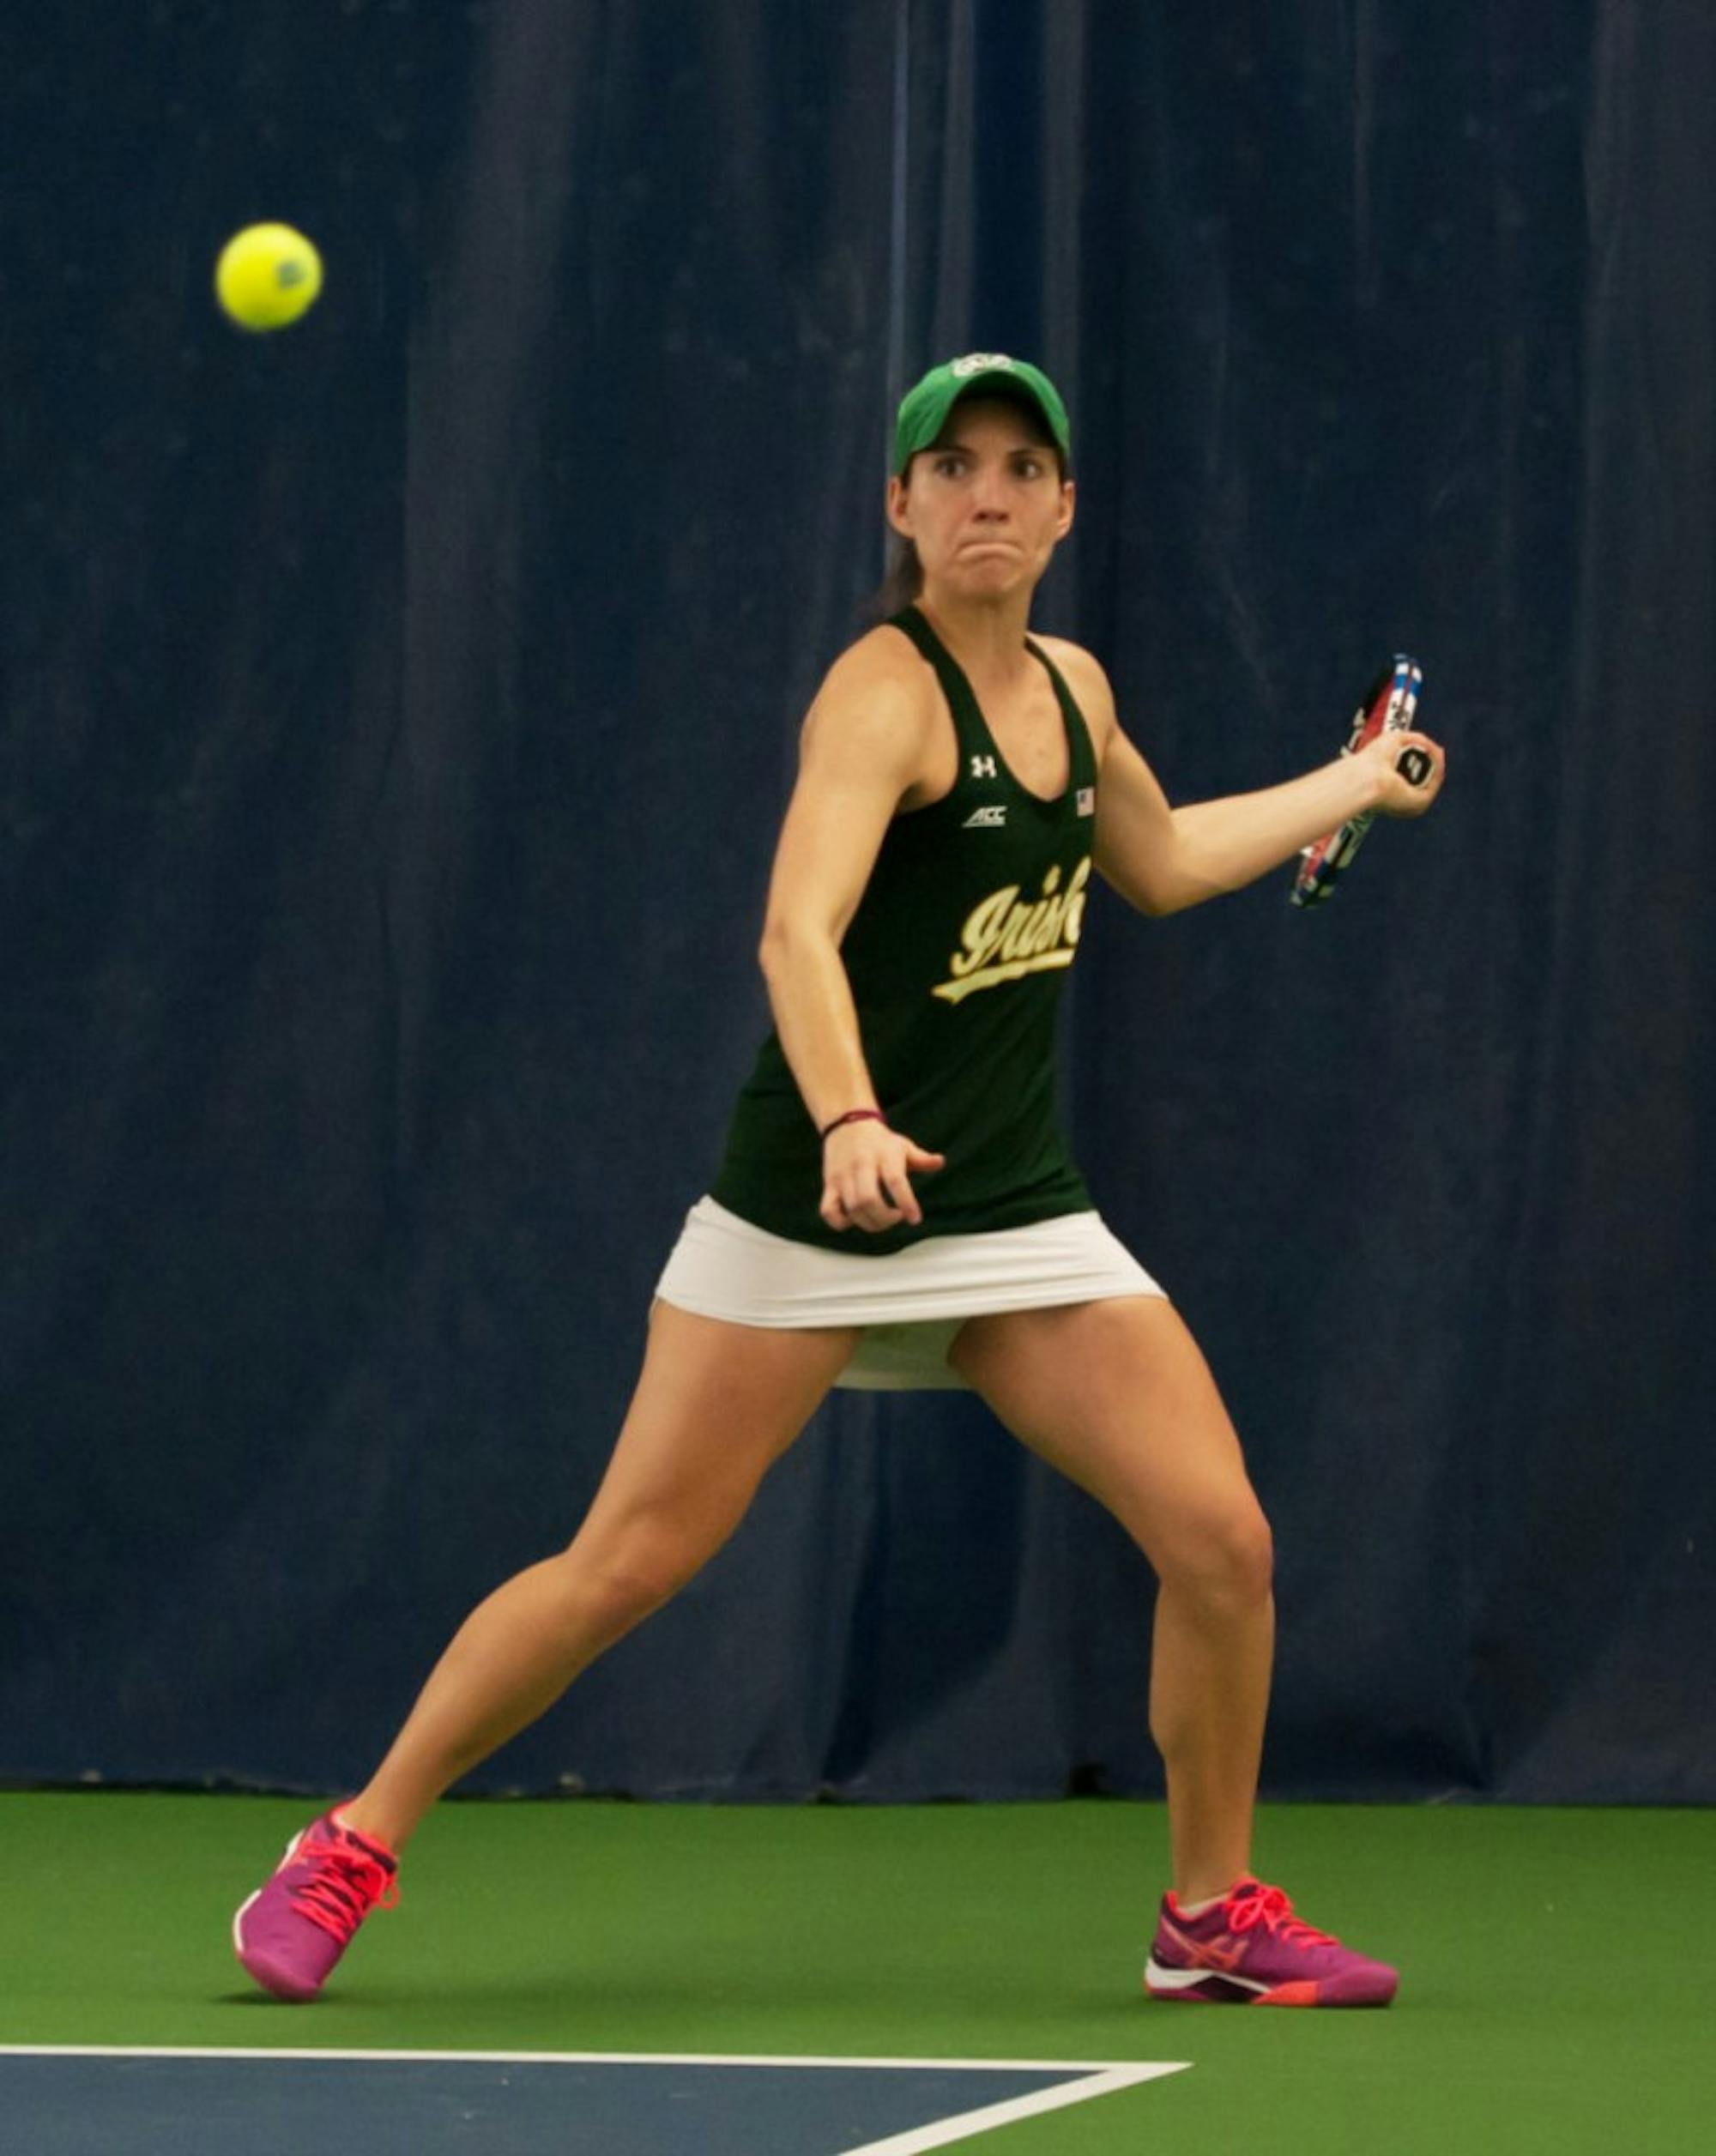 Irish senior Allison Miller readies to hit a forehand during Notre Dame's 5-2 win over Purdue on Feb. 22 at Eck Tennis Pavilion.